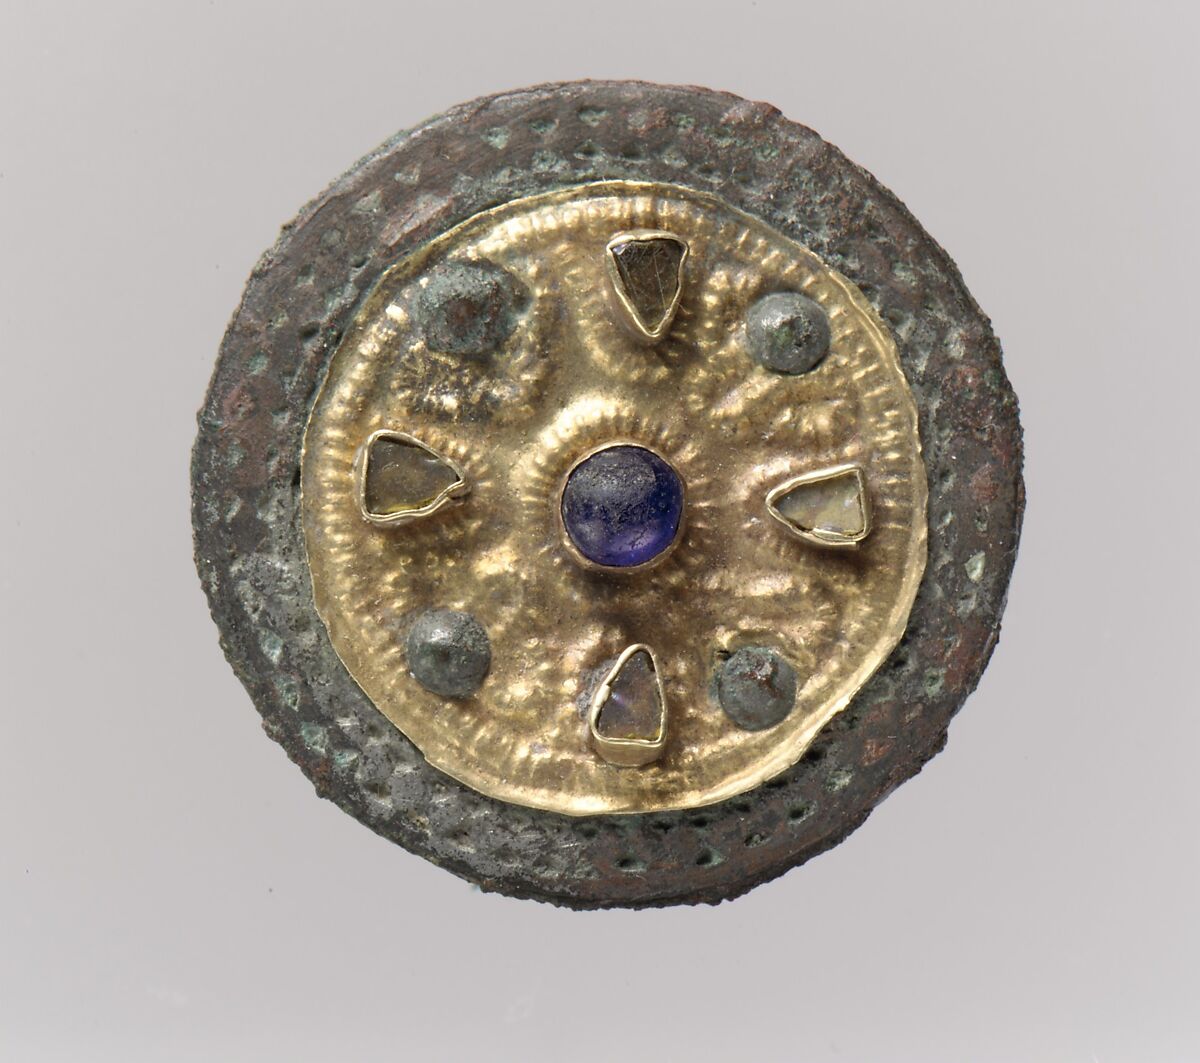 Disk Brooch, Gold, glass, copper alloy,  glass paste cabochons, Frankish 